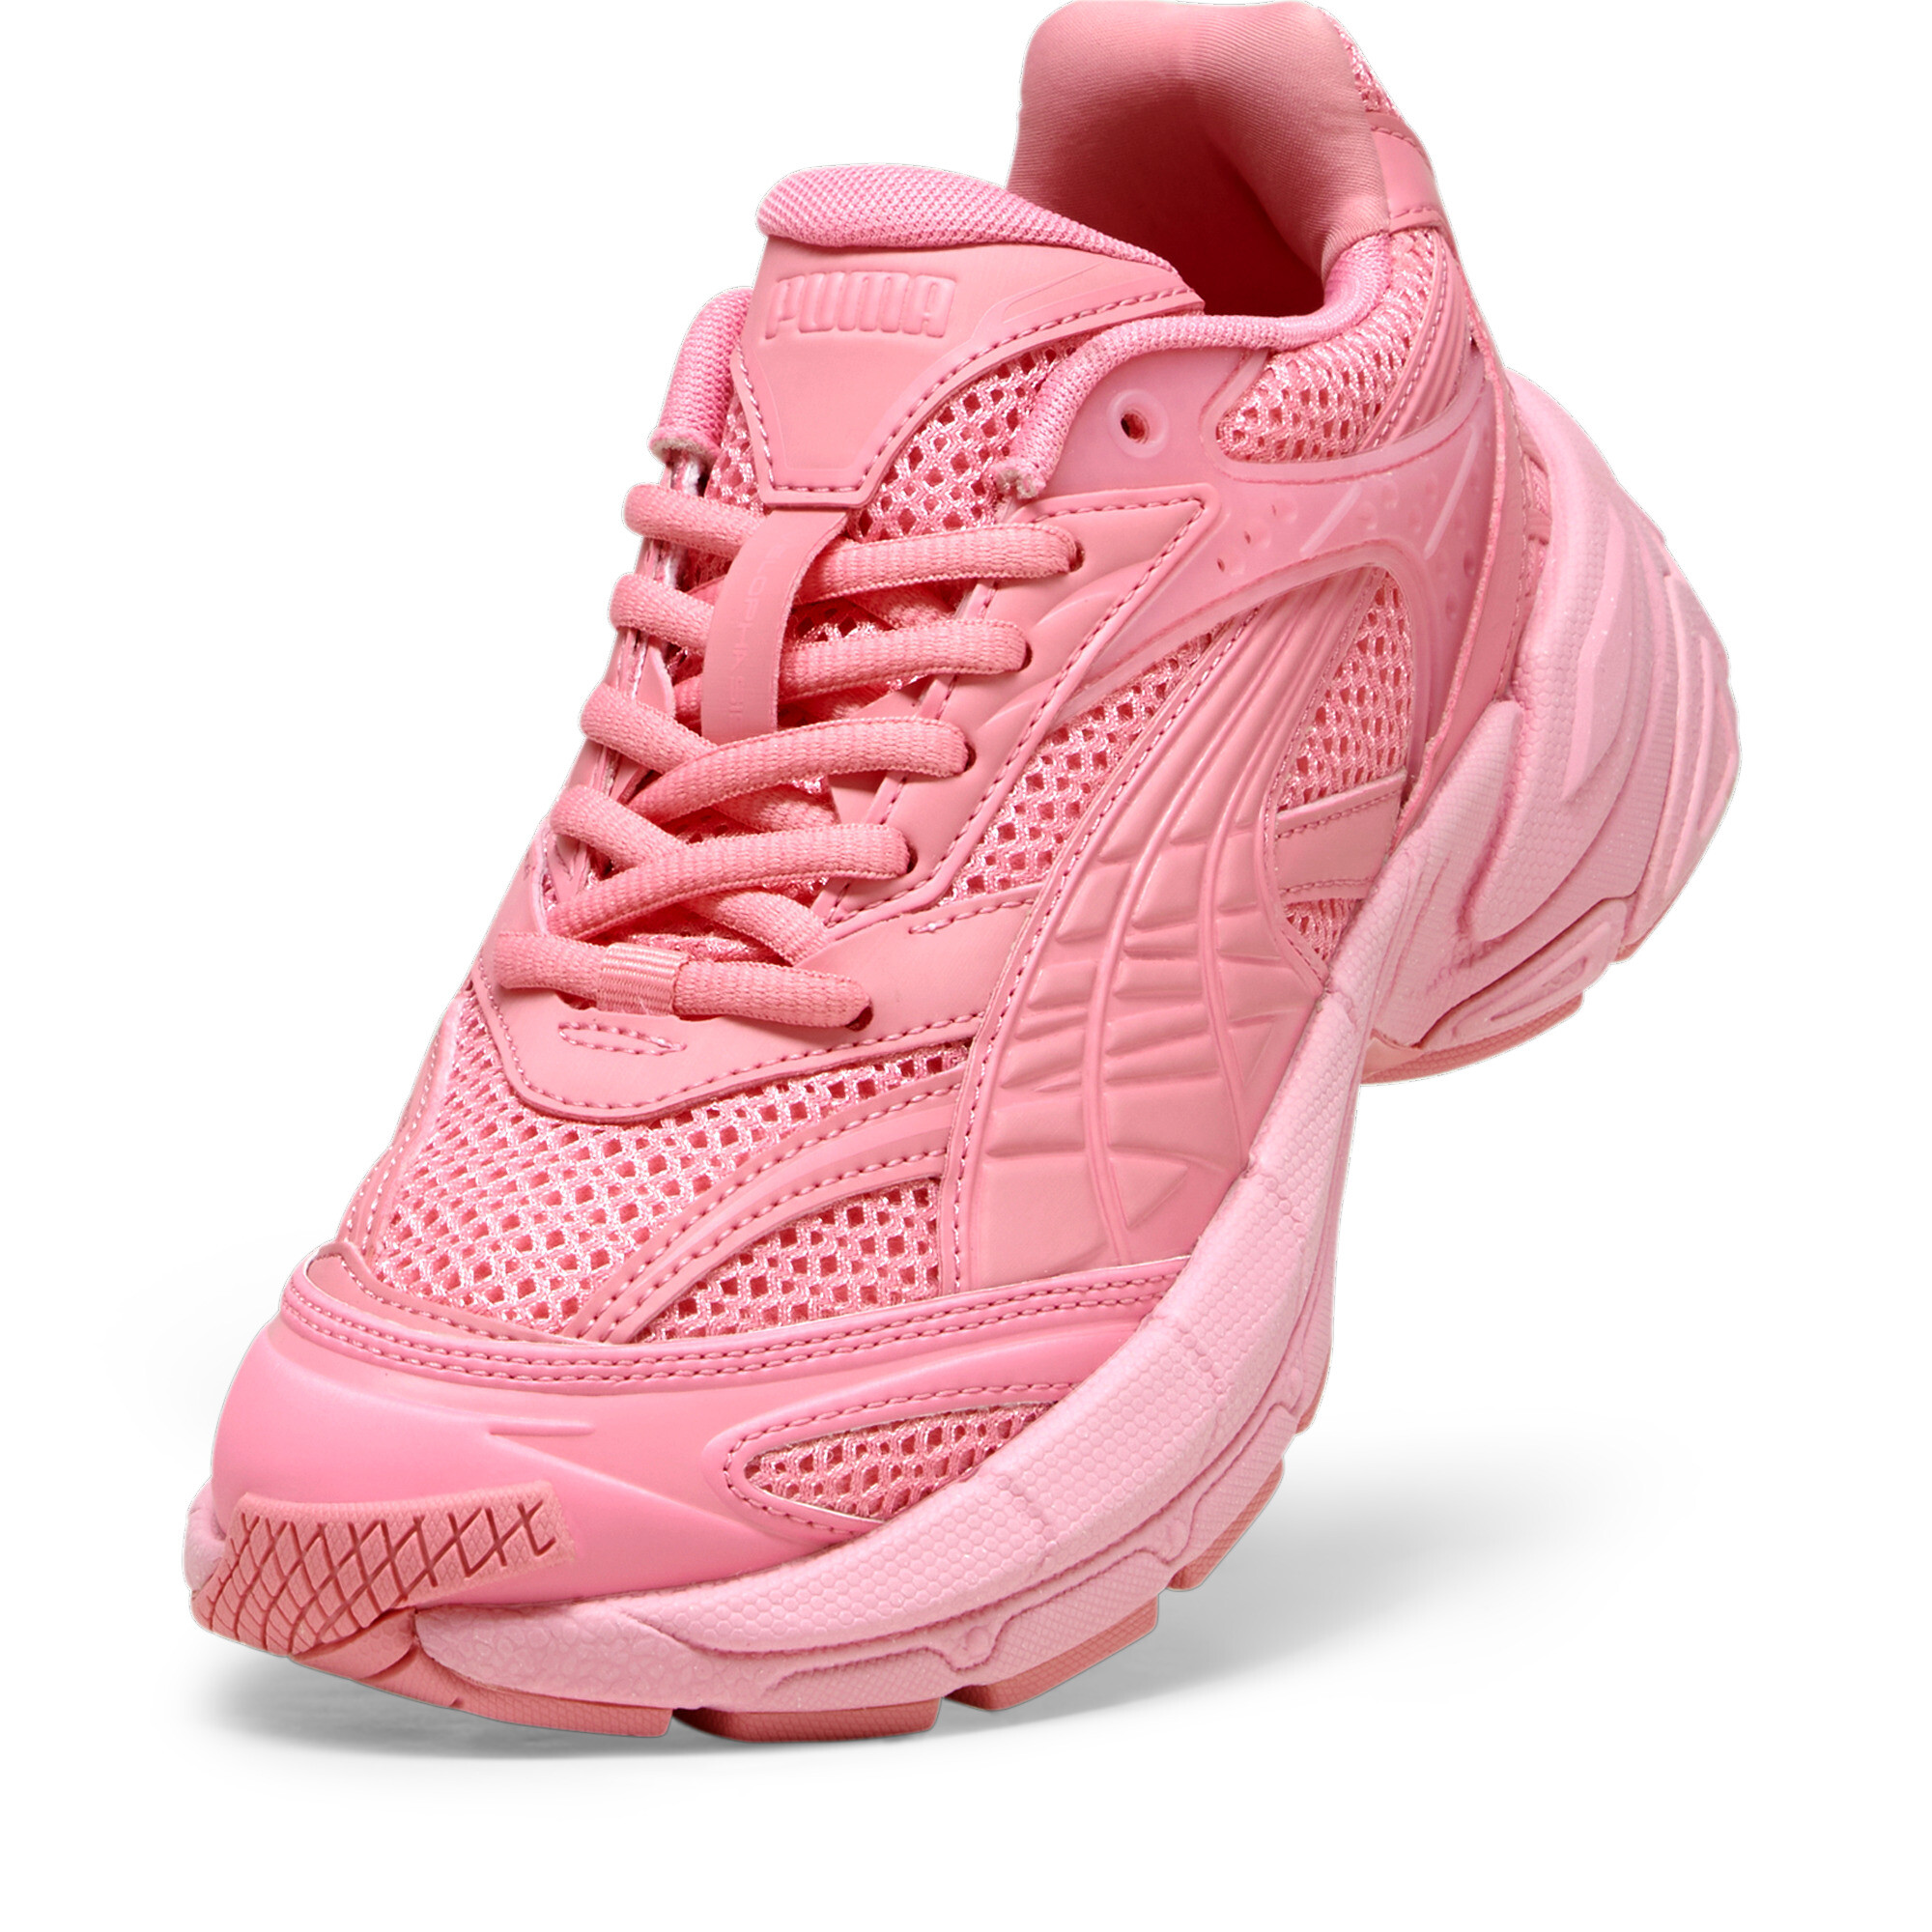 Puma Velophasis Technisch Sneakers, Pink, Size 43, Shoes